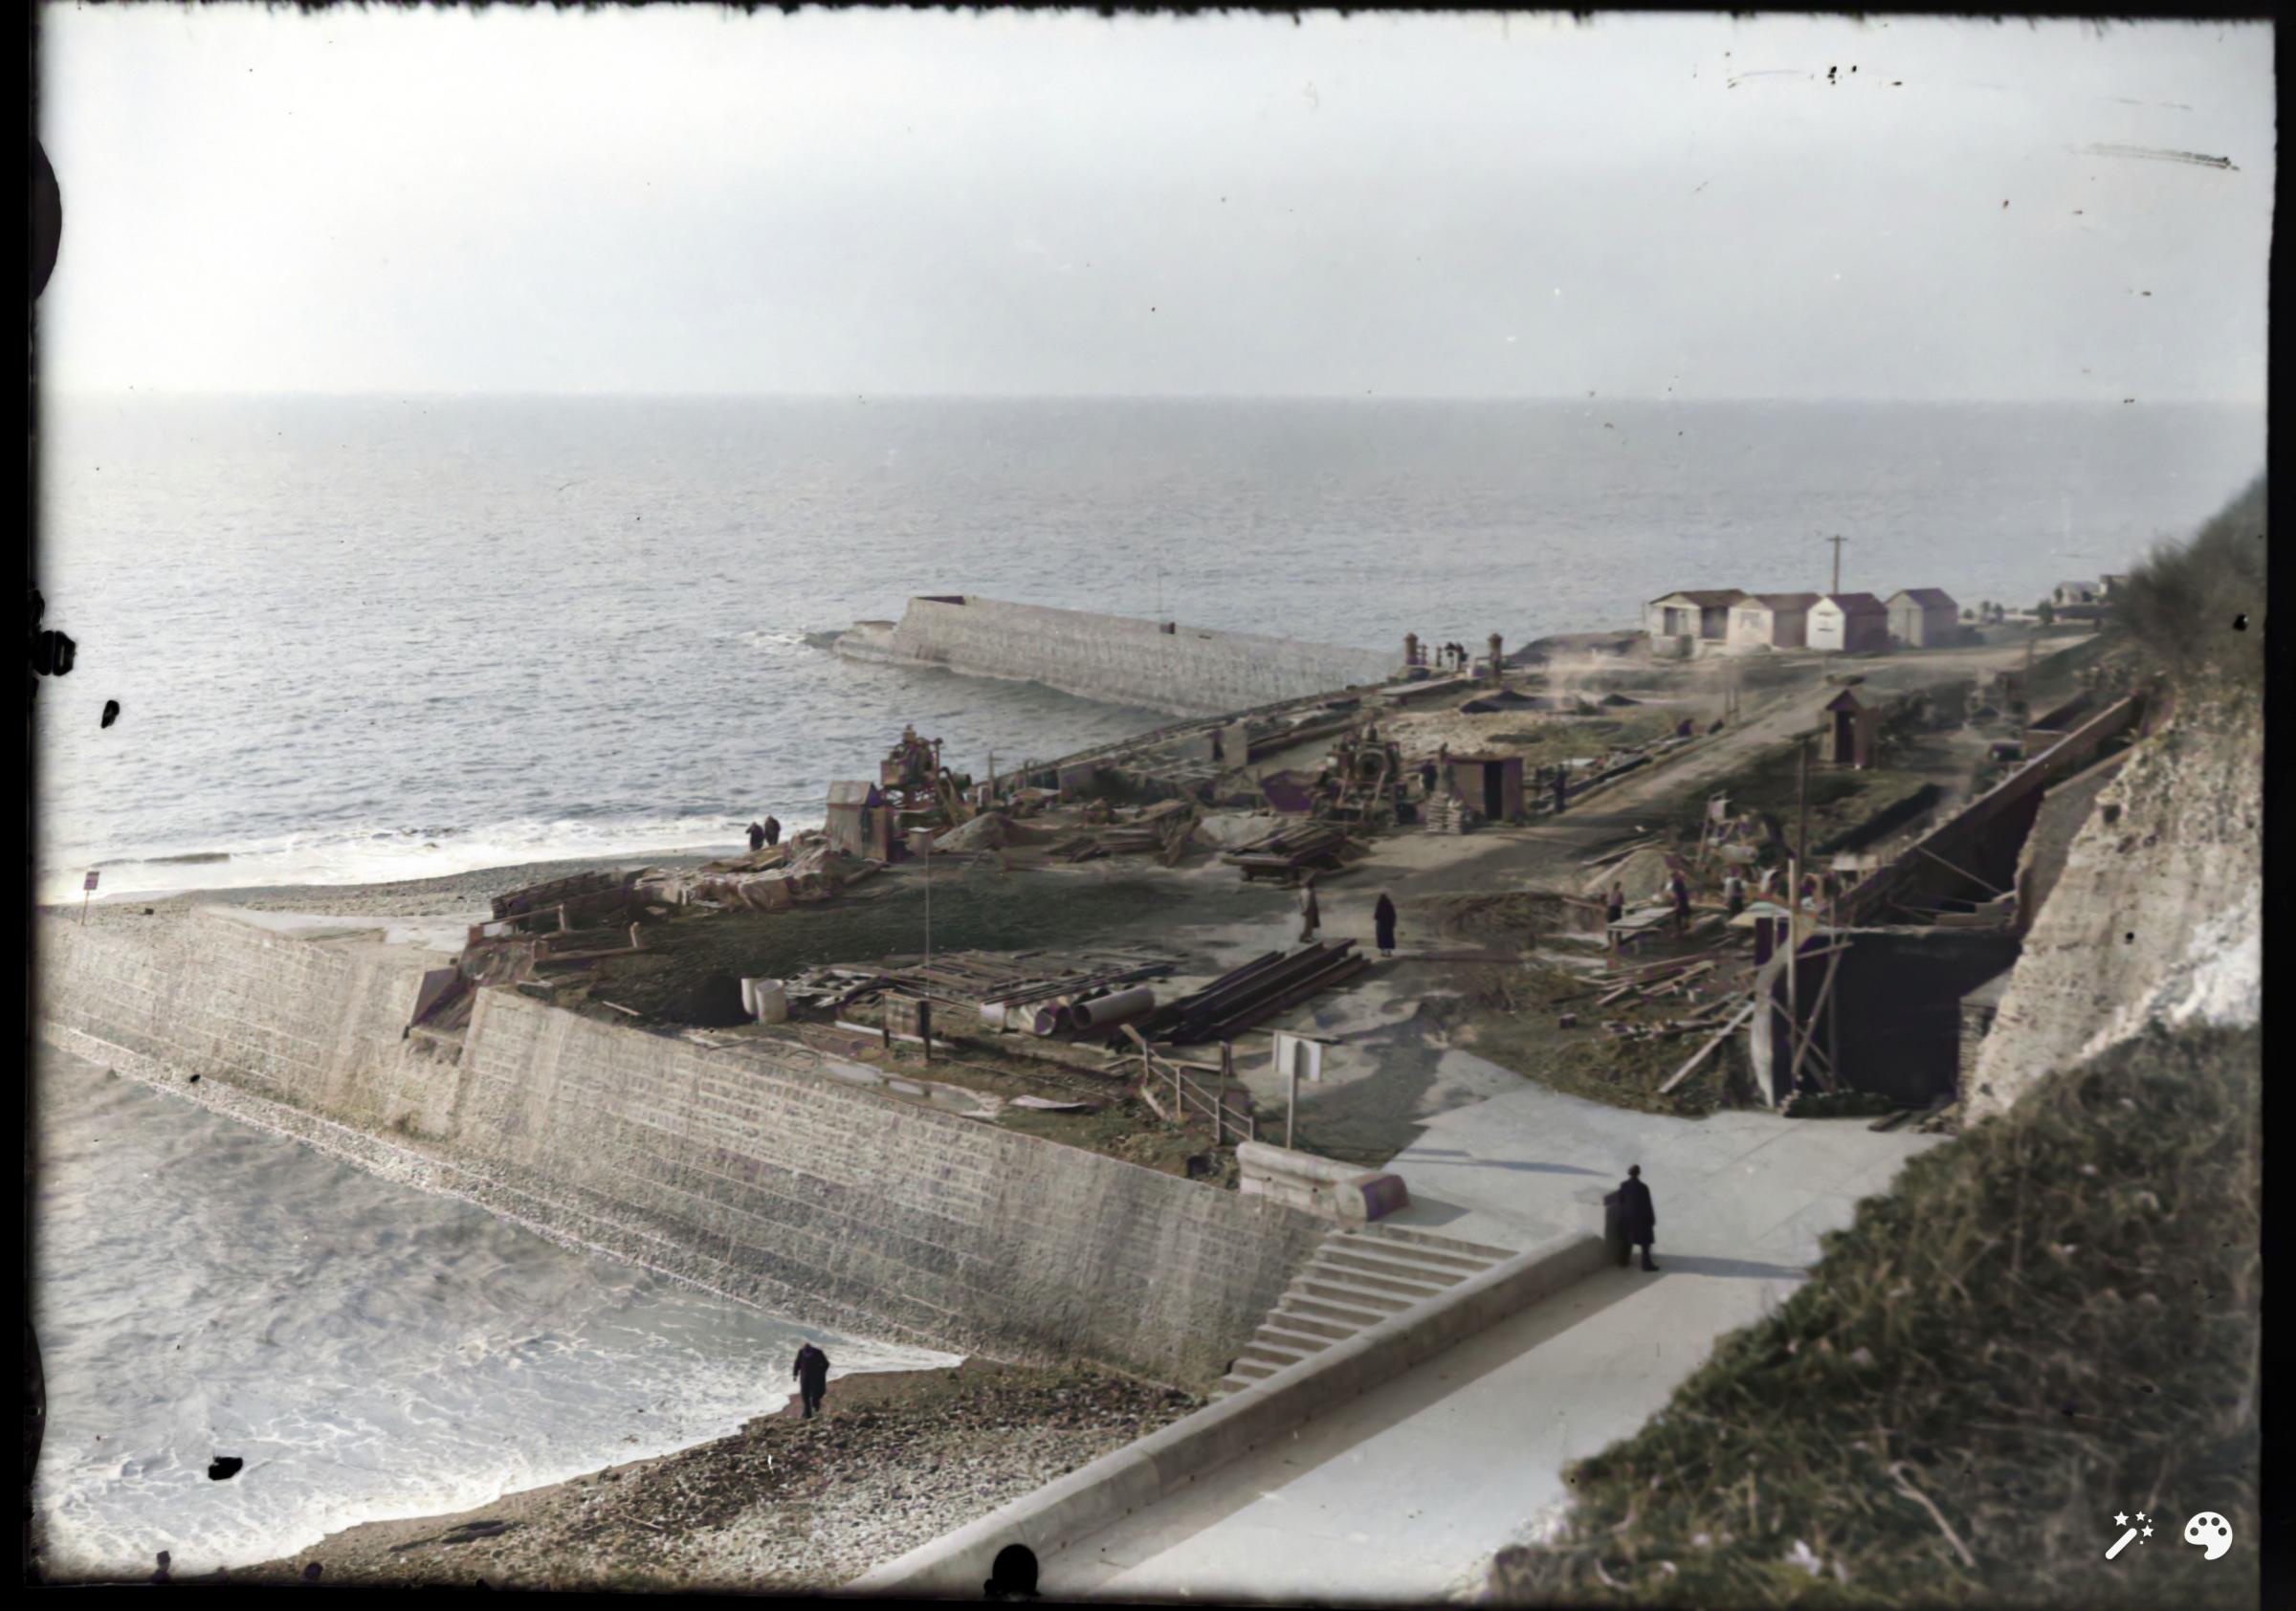 Construction of Black Rock swimming pool in 1936